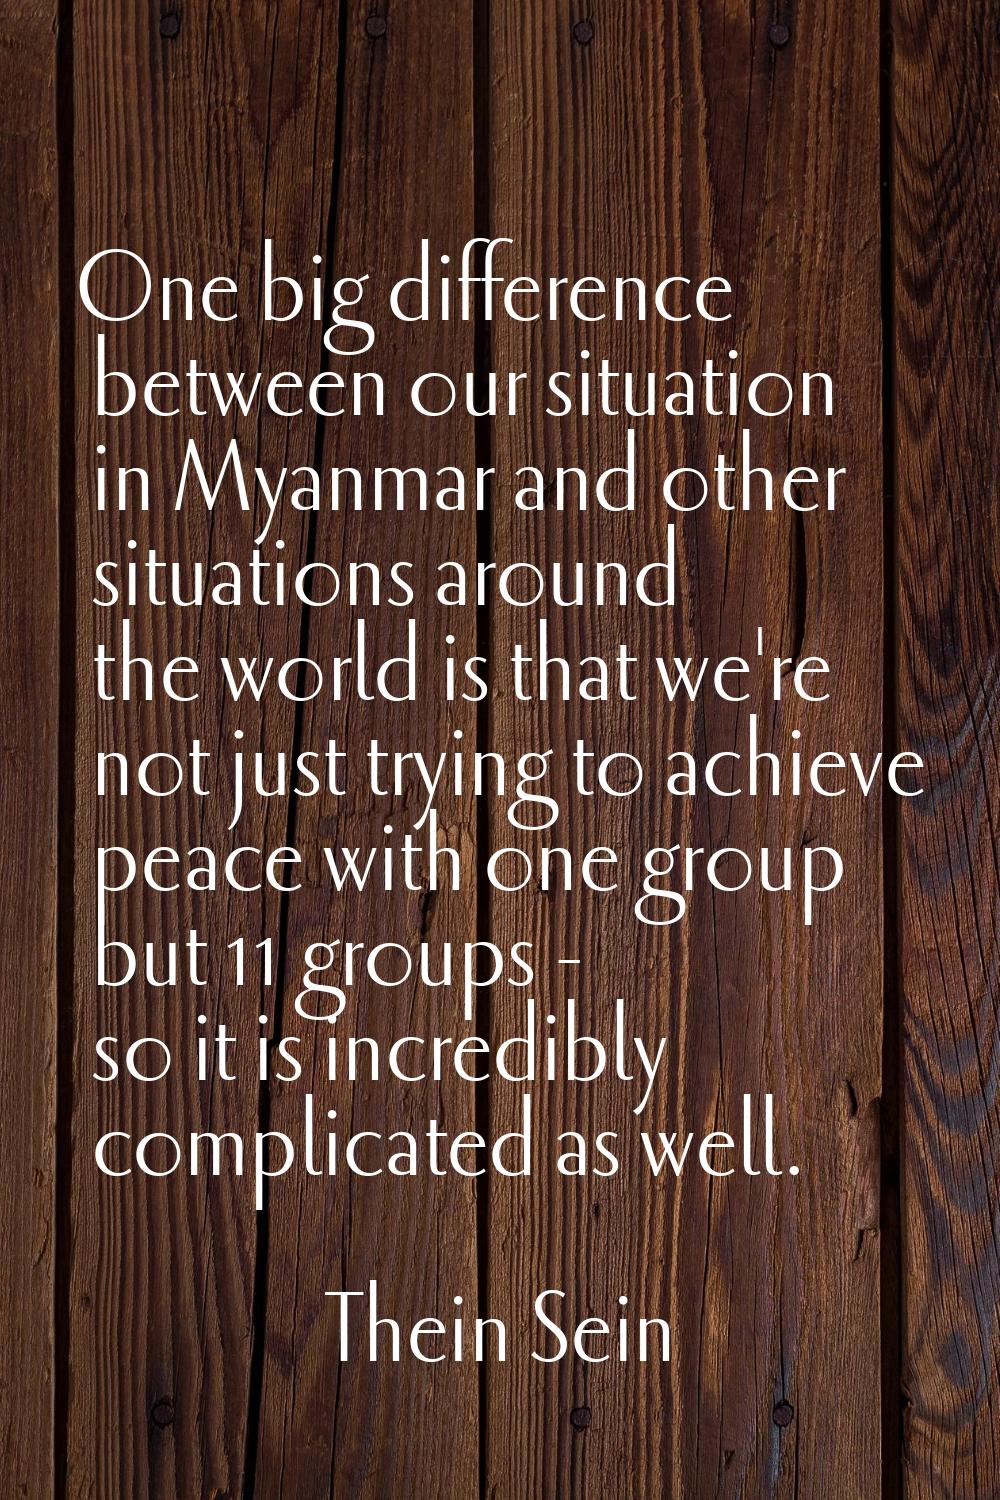 One big difference between our situation in Myanmar and other situations around the world is that w